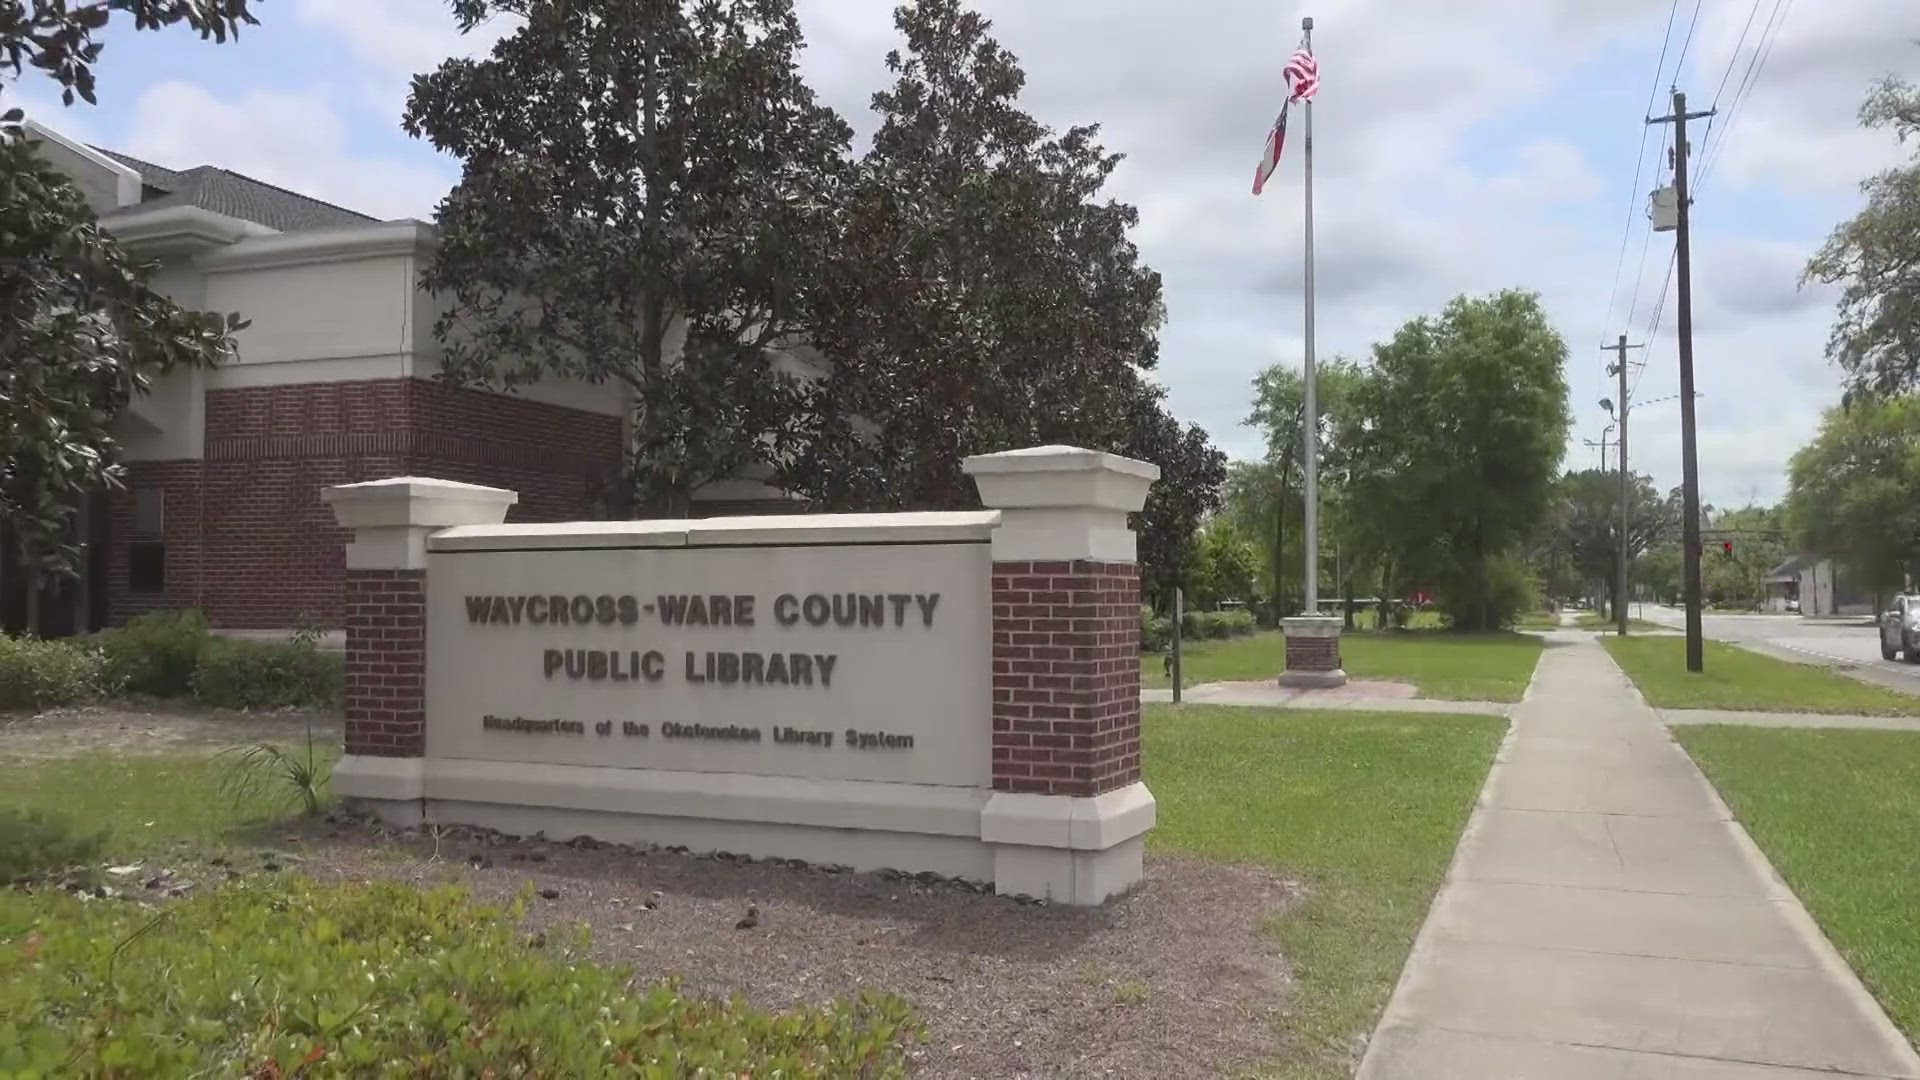 Despite concerns on social media, the library director confirmed no libraries will be closing within the Okefenokee Regional Library System.